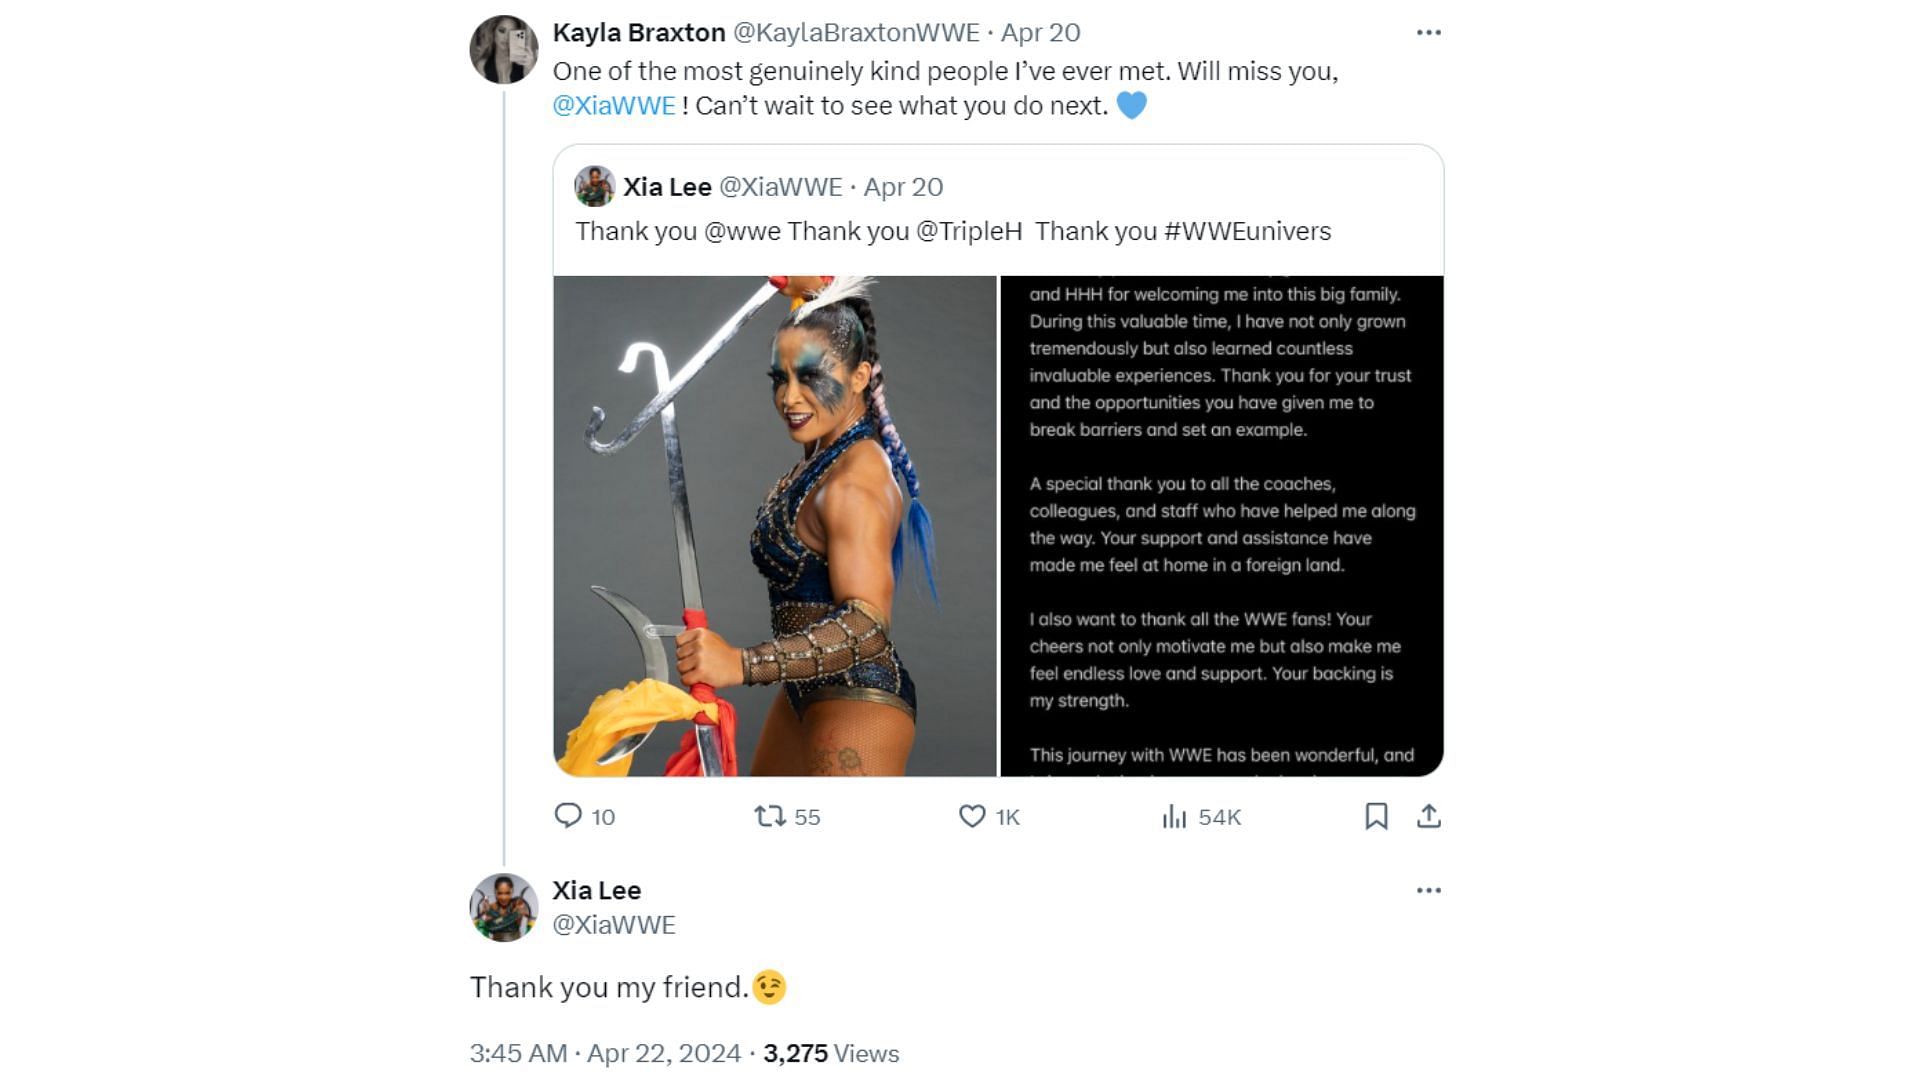 A screengrab from their online interaction on Twitter